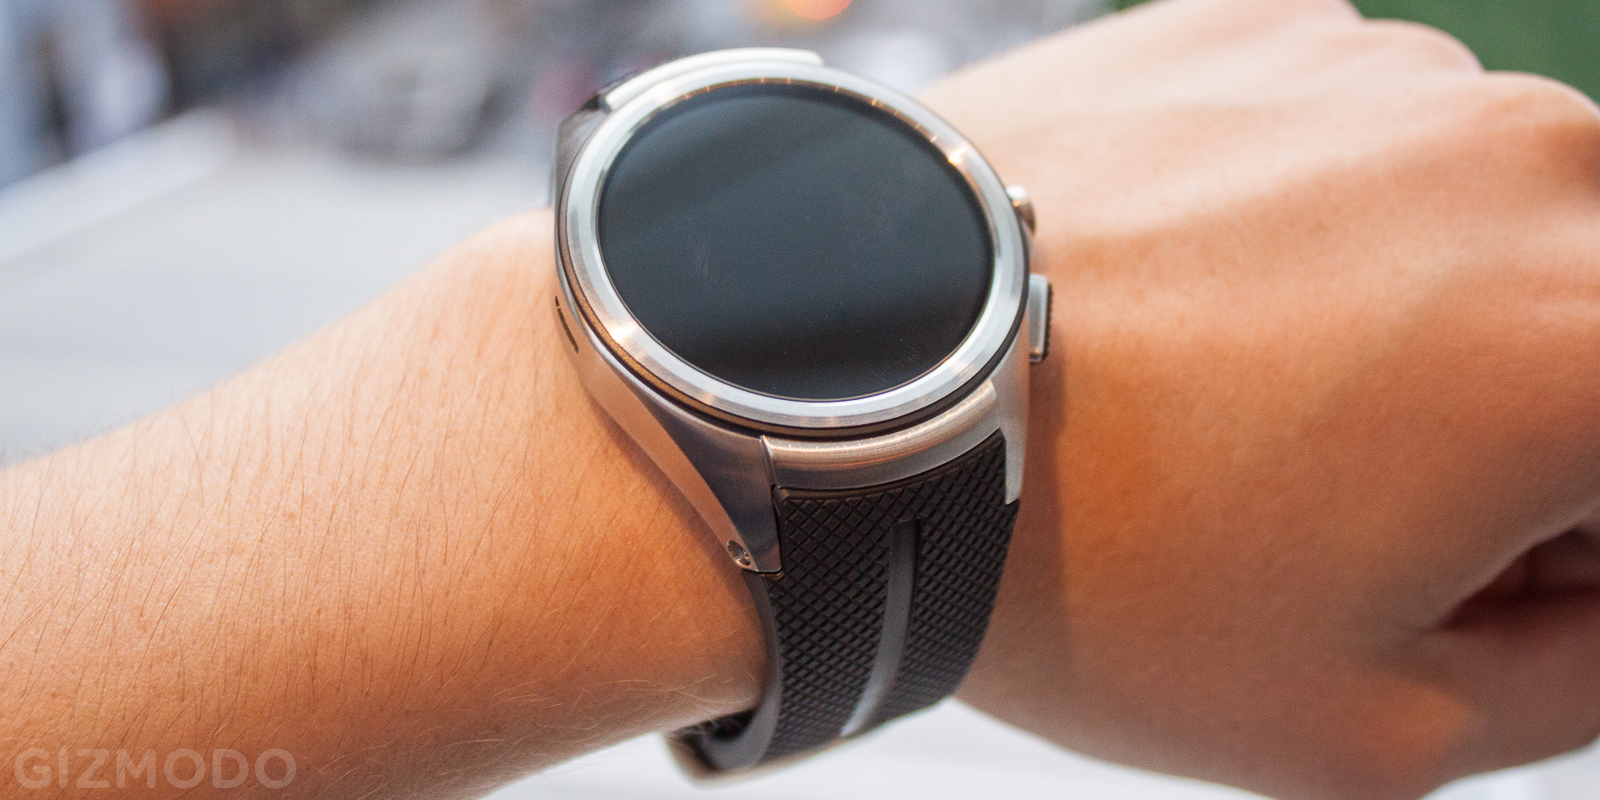 The LG Watch Urbane 2 Is Android Wear’s First LTE Smartwatch, And It’s Big As Hell